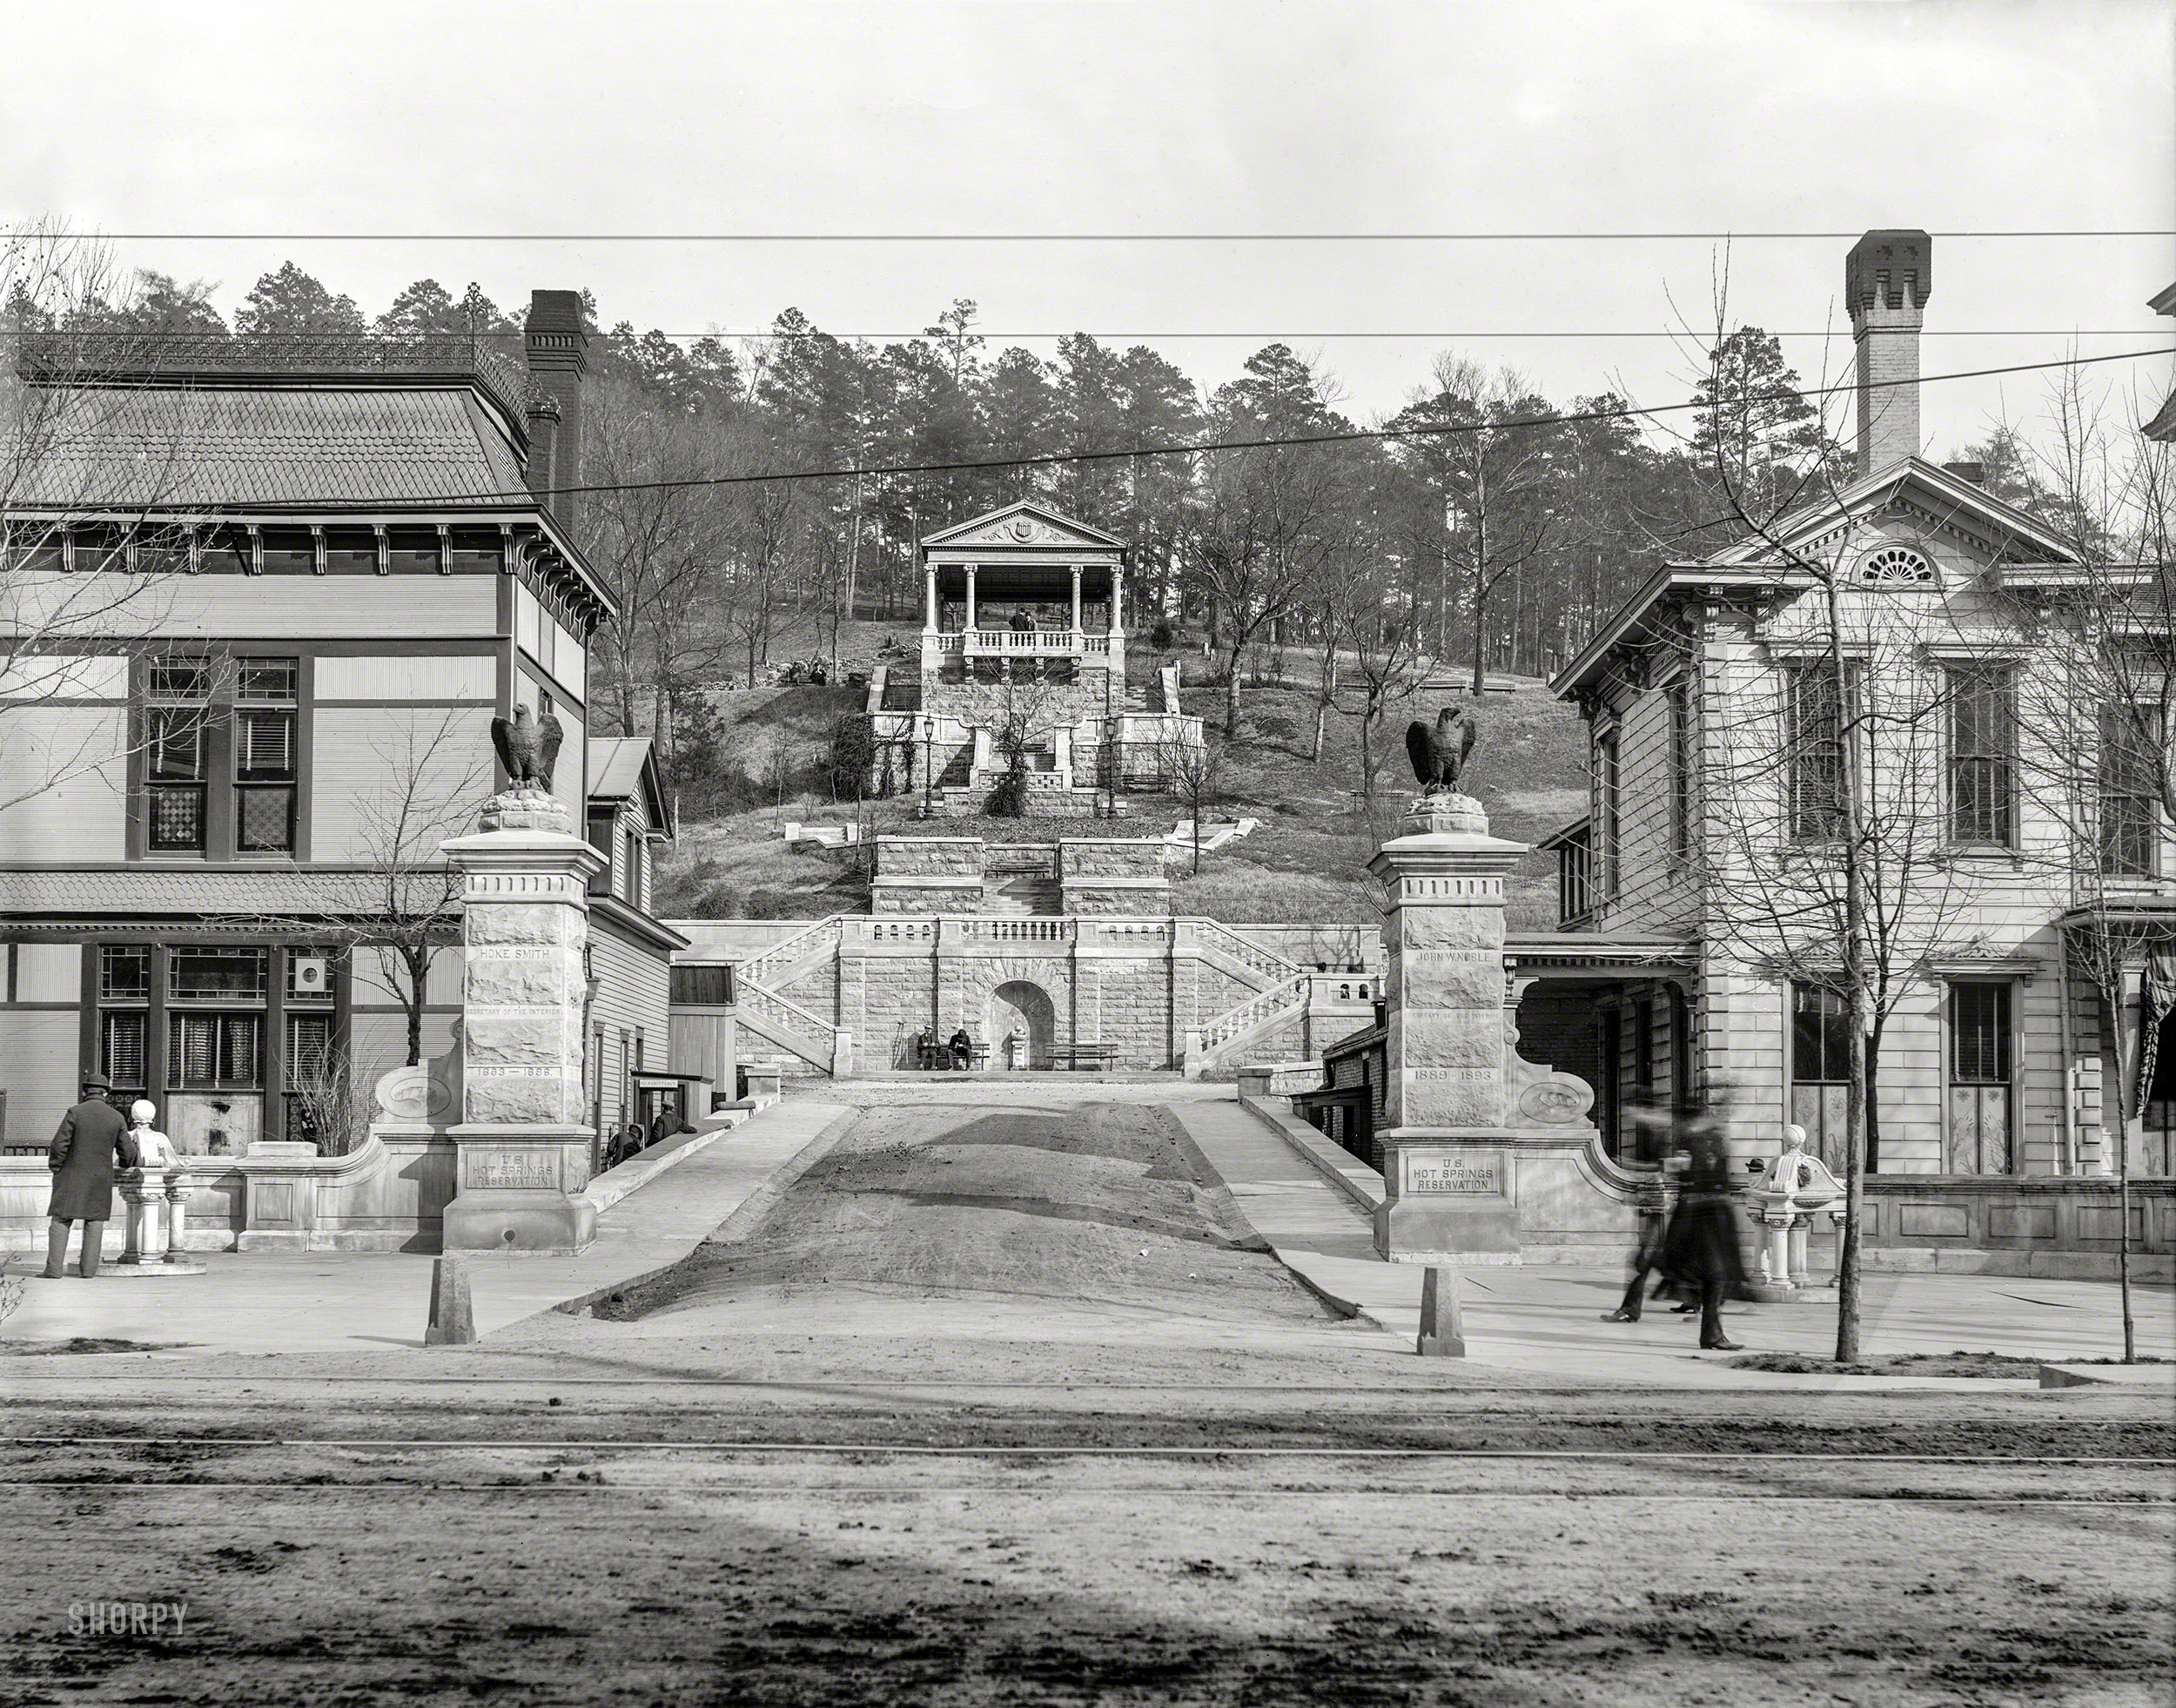 Circa 1900. "Entrance, Government Reservation, Hot Springs, Arkansas." 8x10 inch dry plate glass negative, Detroit Publishing Company. View full size.